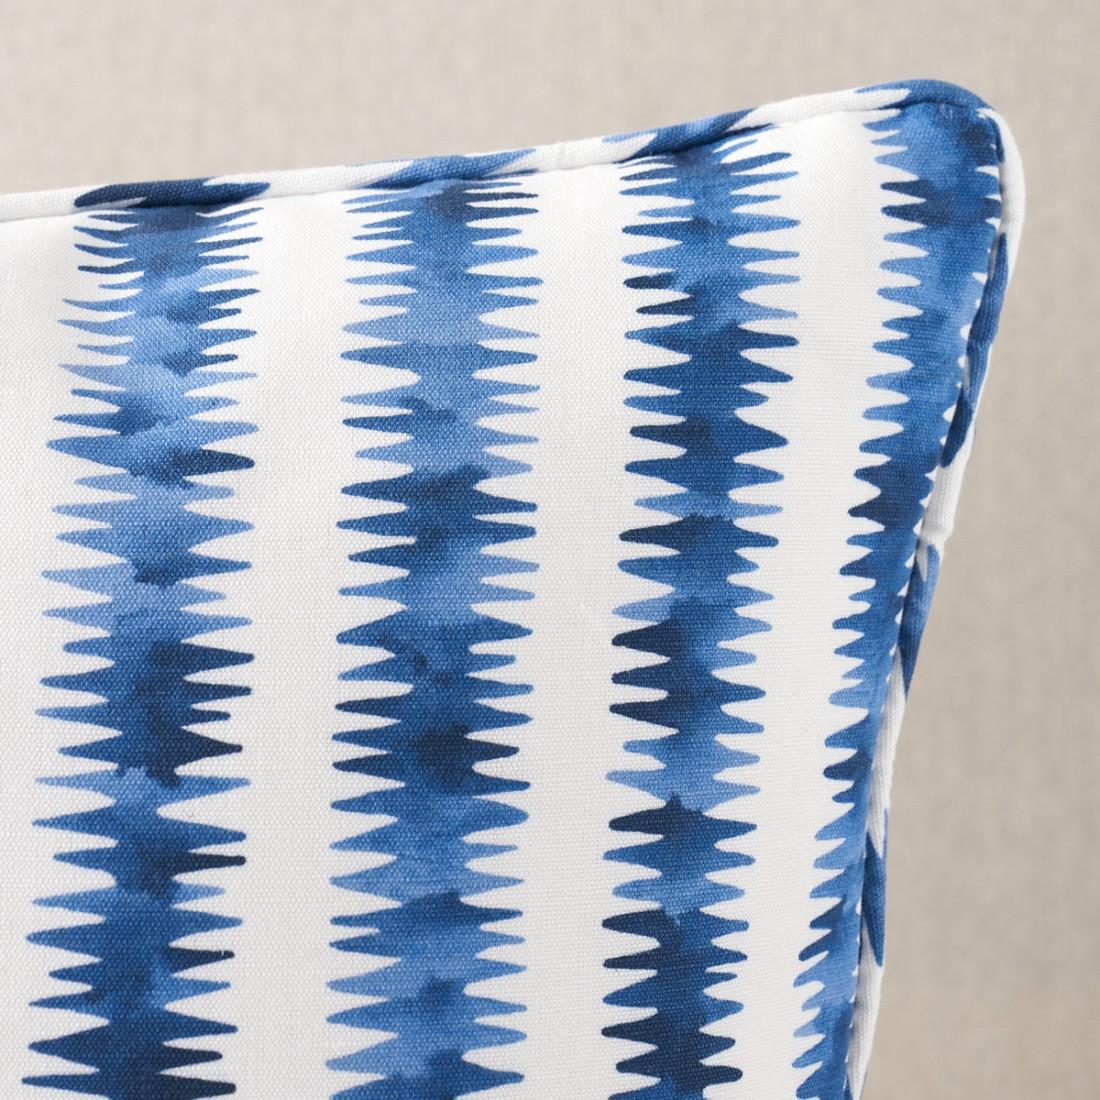 This pillow features Cardiogram by Happy Menocal for Schumacher with a self-welt finish. Happy Menocal’s Cardiogram is an imaginative small-scale stripe with electric energy. A creative take on a classic pattern, this versatile fabric is a lively